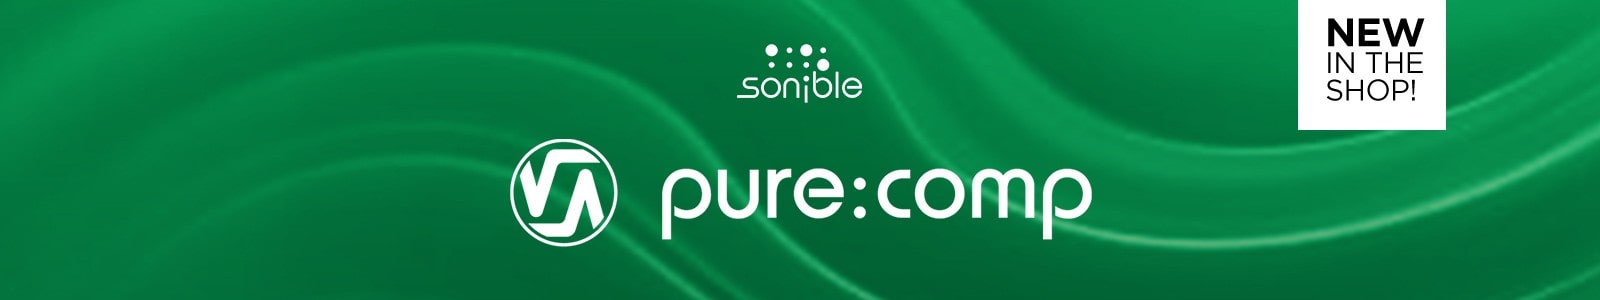 pure:comp by Sonible